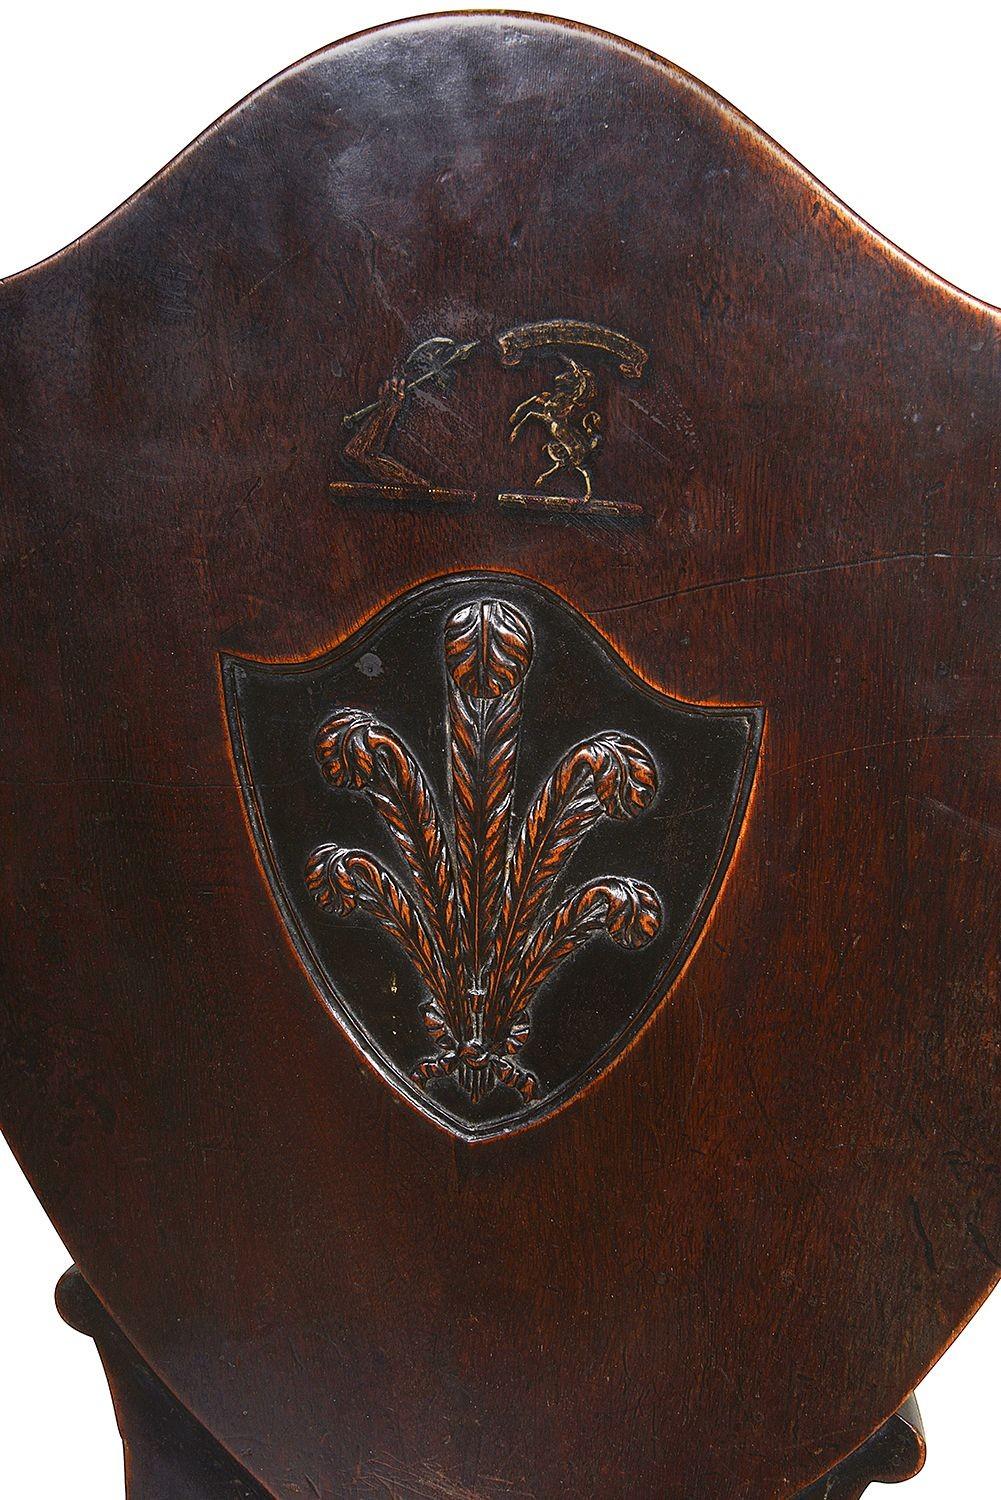 English Pair 18th Century Mahogany Sheild Back Hall Chairs with Prince of Wales Feathers For Sale